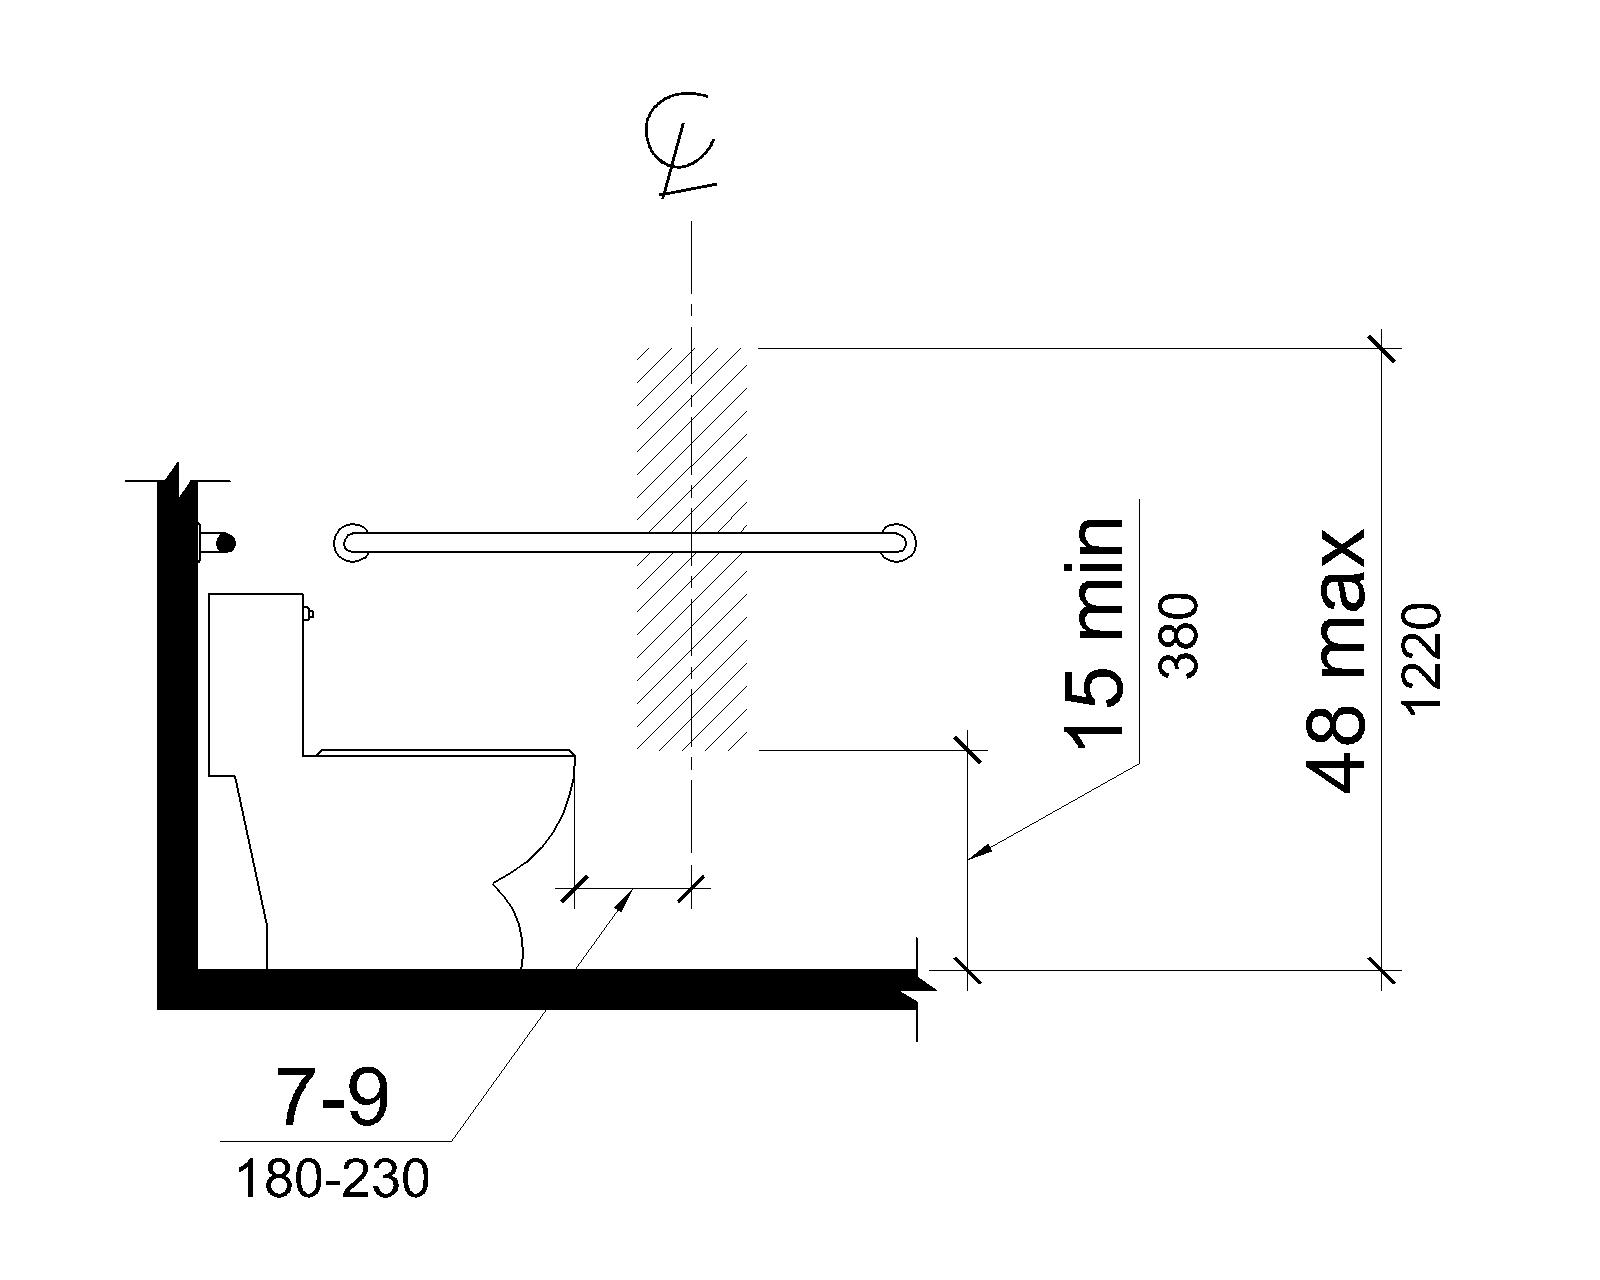 Elevation drawing shows the centerline of the toilet paper dispenser to be 7 to 9 inches (180 to 230 mm) in front of the water closet. The outlet of the dispenser is 15 inches (380 mm) minimum and 48 inches (1220 mm) maximum above the deck surface.